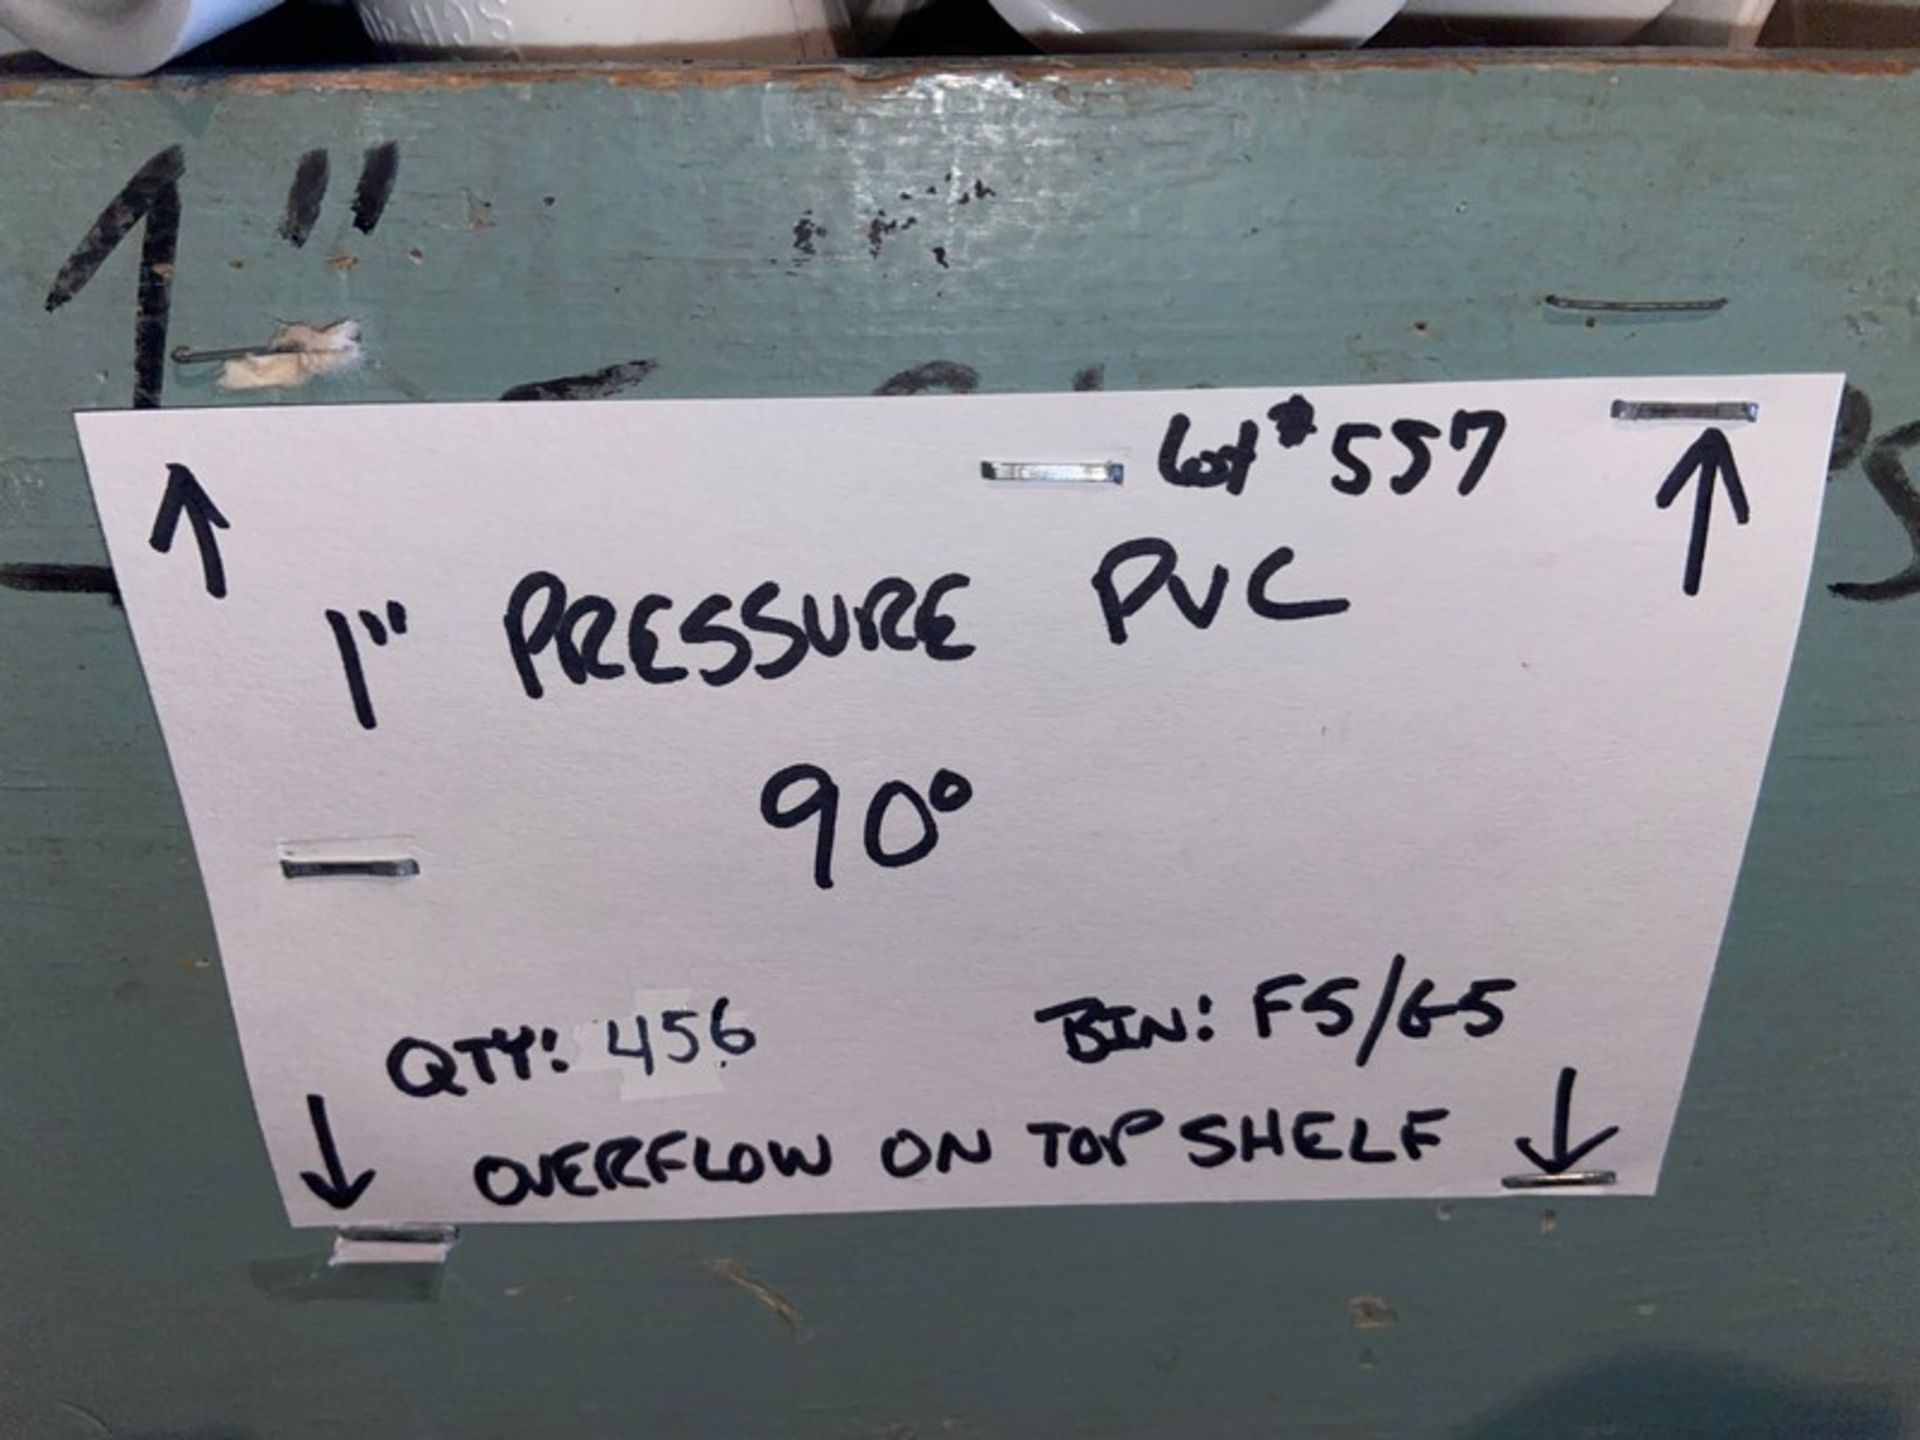 (456) 1” Pressure PVC 90’ (Bin:F5/G5) (LOCATED IN MONROEVILLE, PA) - Image 10 of 10